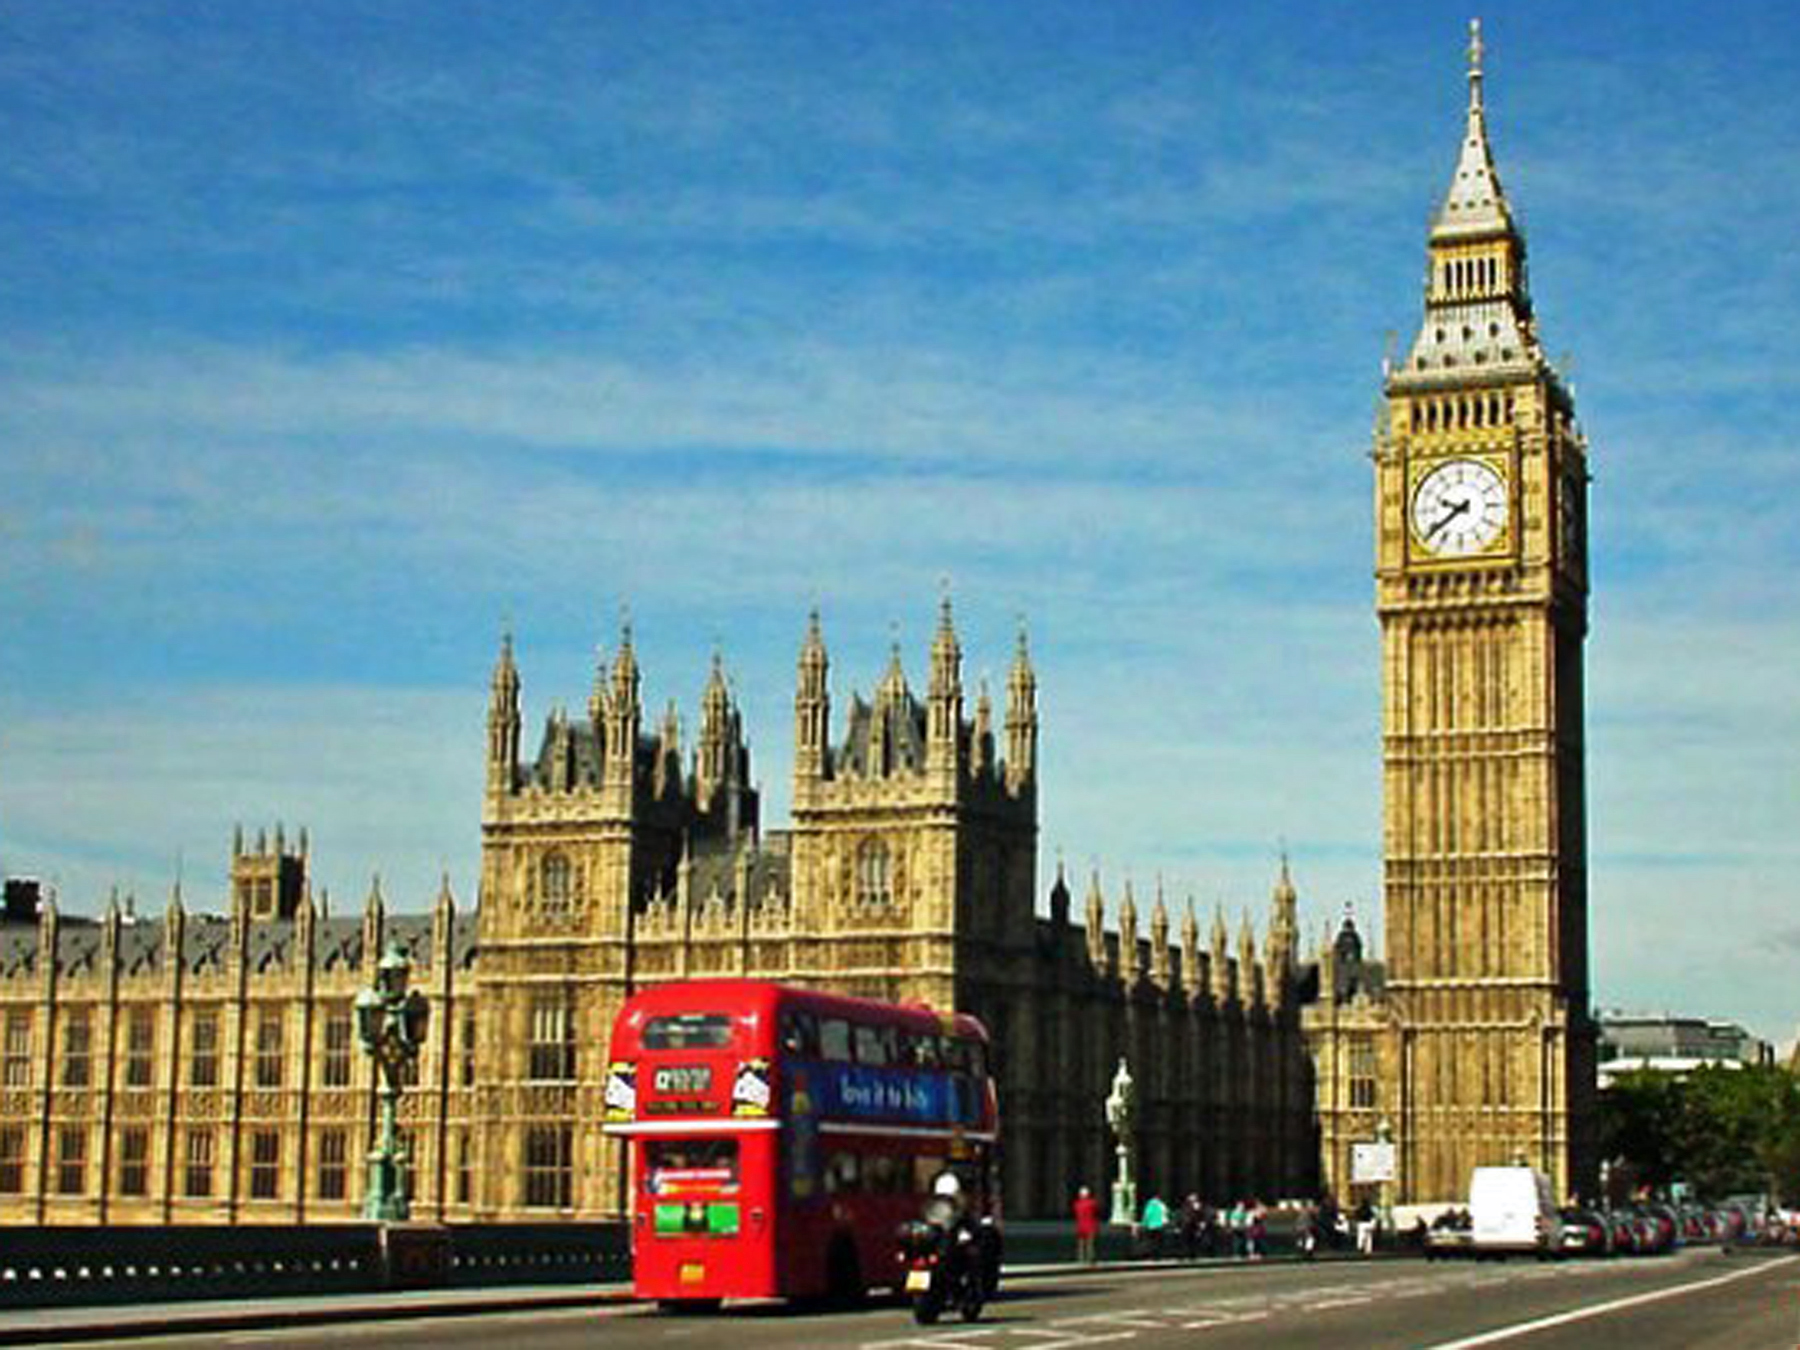 12 Interesting Facts About Big Ben London - Travel Zom